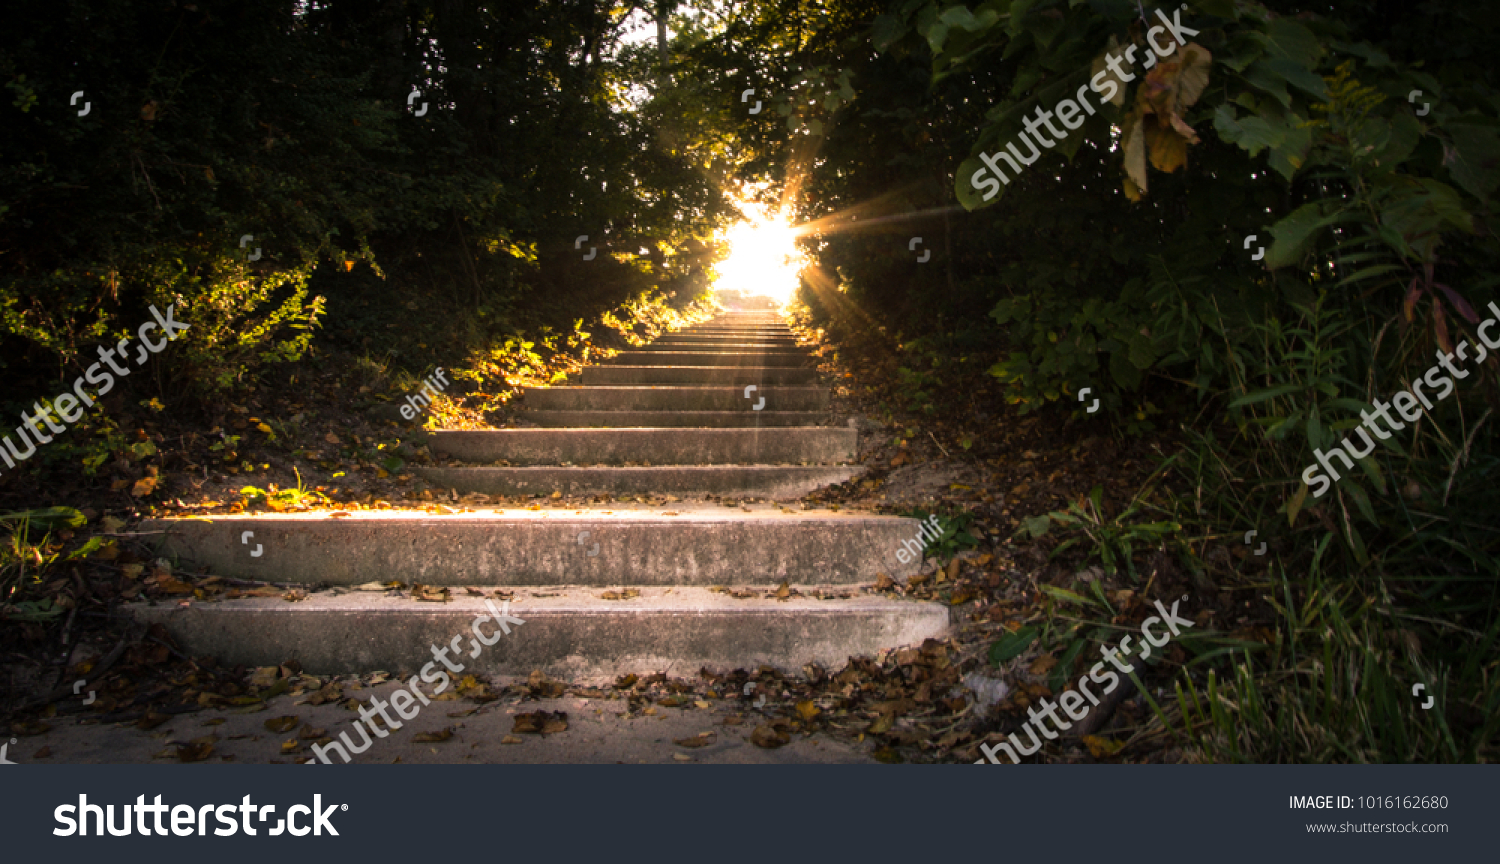 Sunbeams Through The Forest. Sunbeams illuminate a stairway surrounded by a tunnel of trees.
 #1016162680